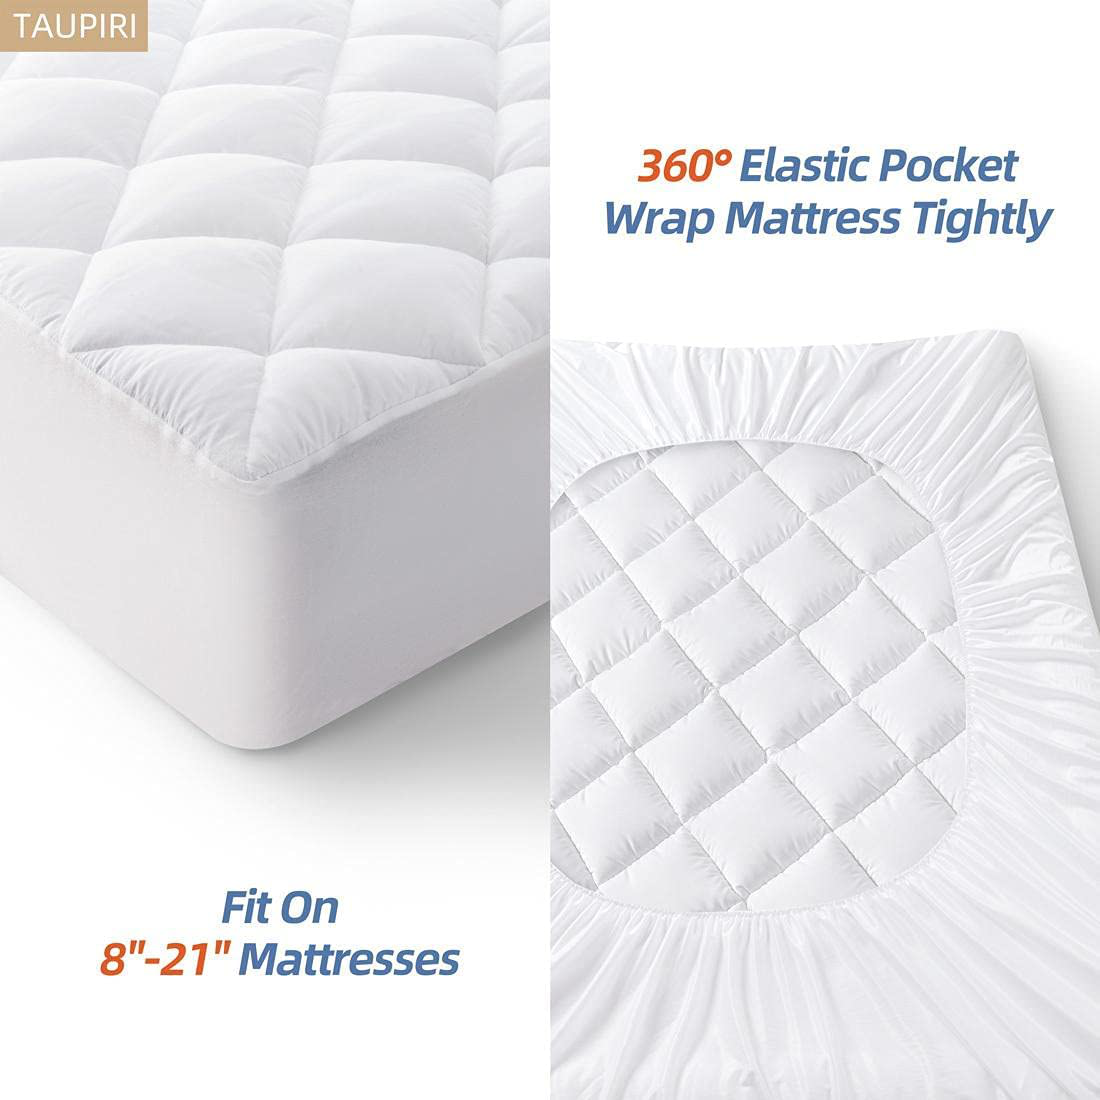 Taupiri Twin Quilted Mattress Pad Cover with Deep Pocket (8"-21"), Cooling Soft Pillowtop Mattress Cover, Down Alternative Mattress Protector Topper, White